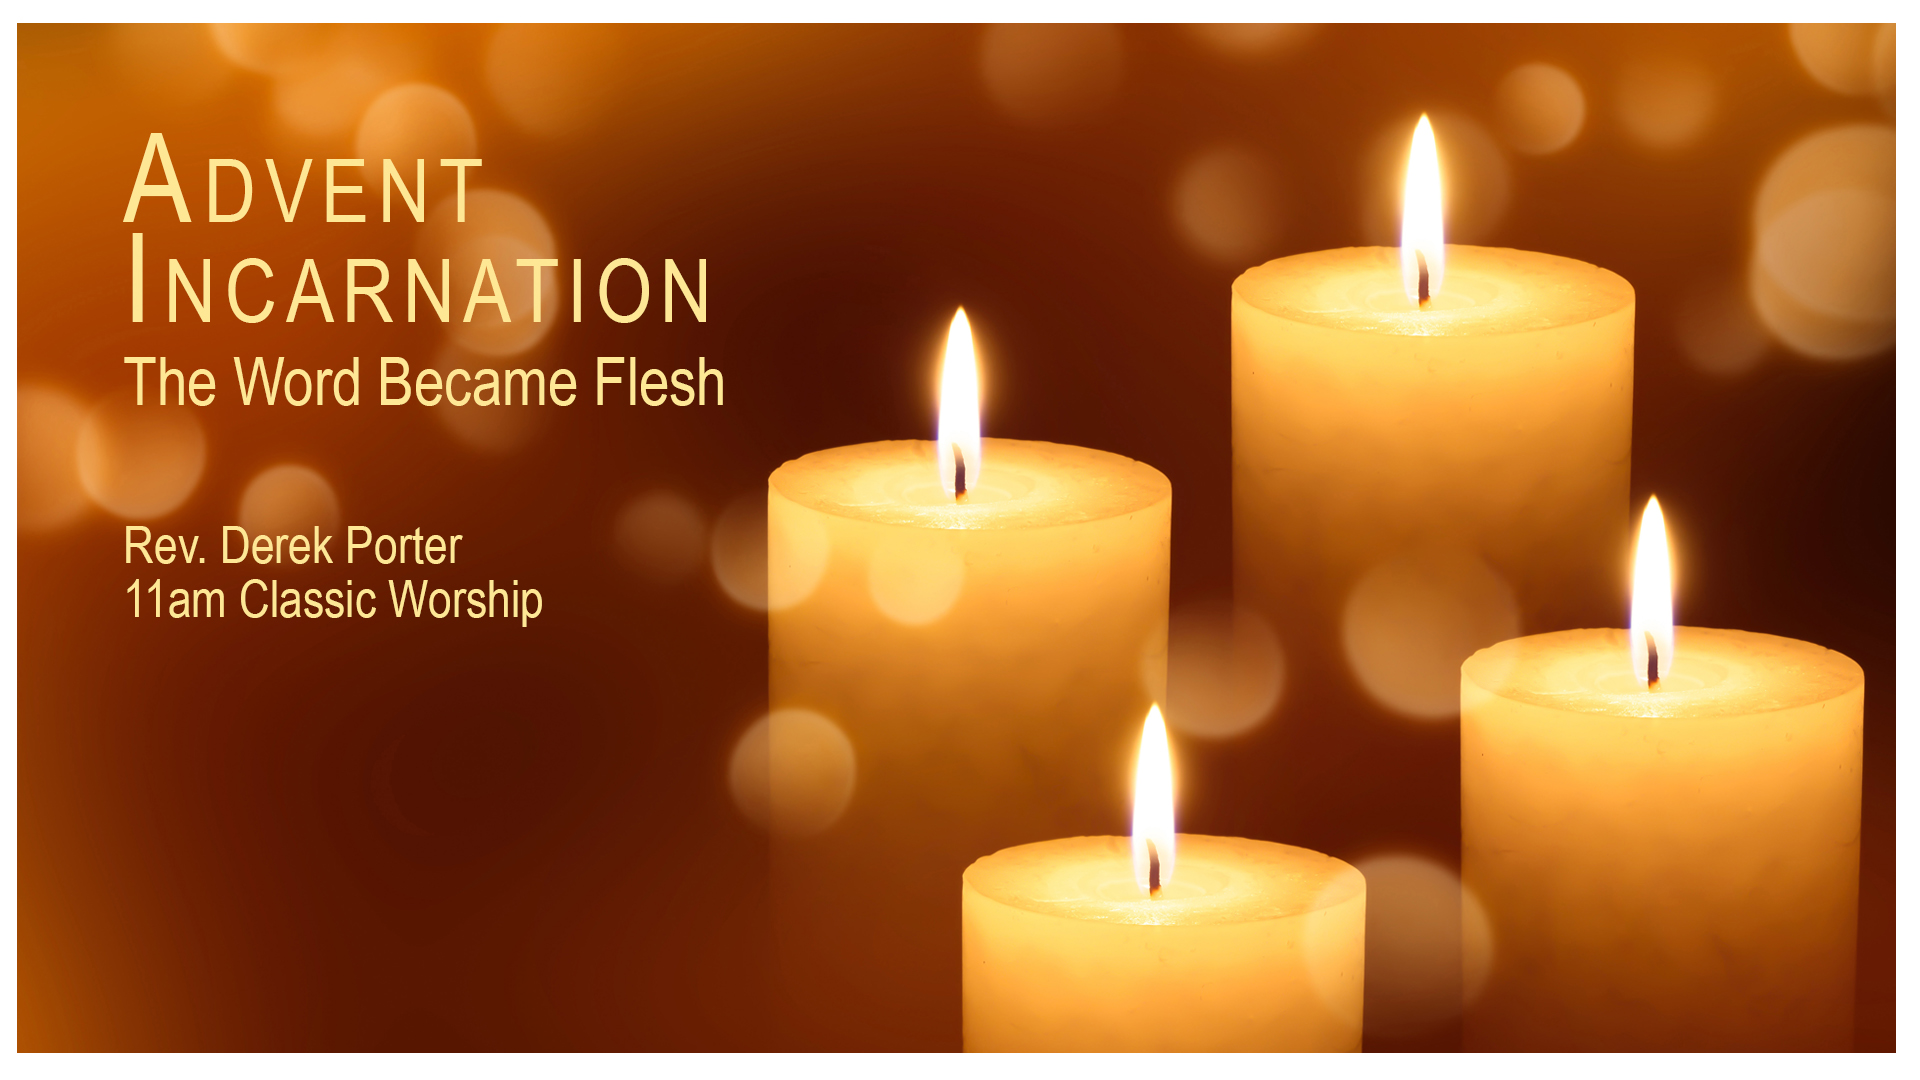 Advent Incarnation: The Word Became Flesh